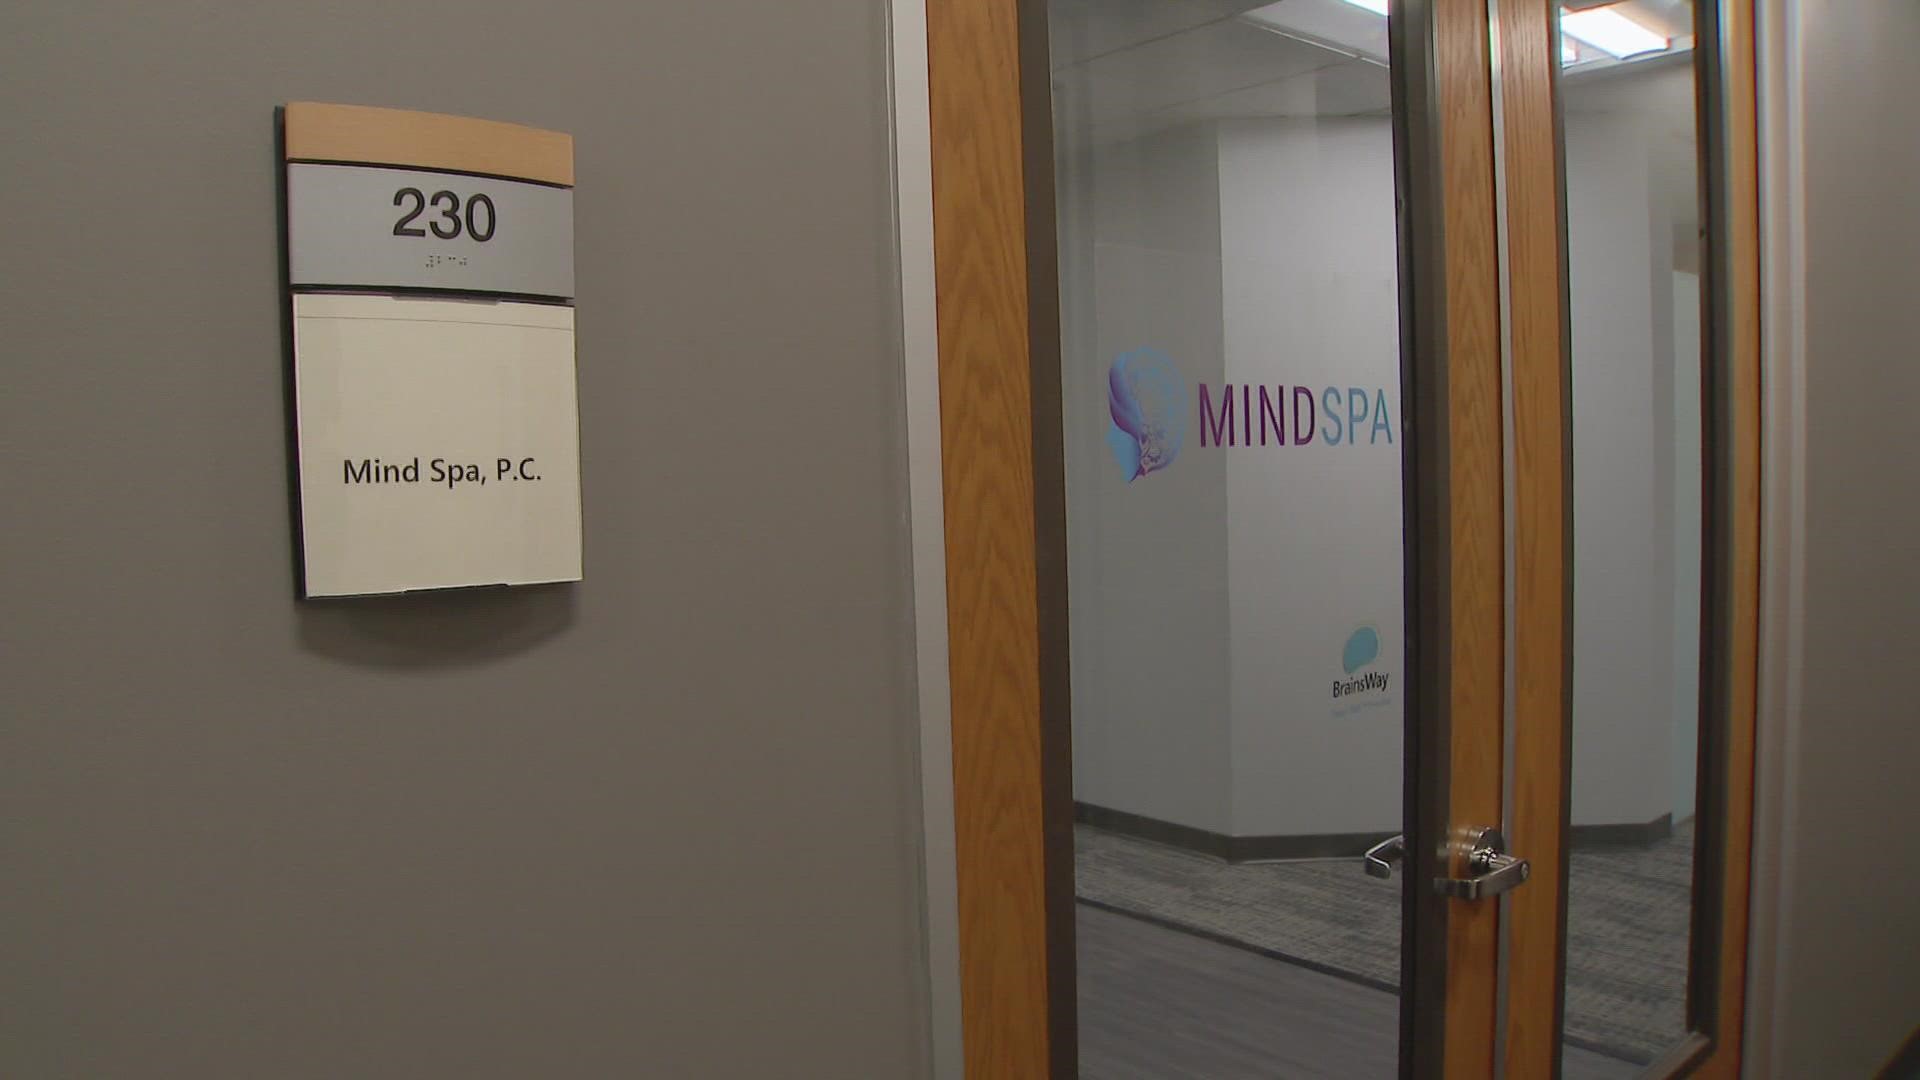 Mind Spa is an outpatient psychiatry and psychology clinic in Greenwood Village that is helping to provide mental health care to veterans and first responders.